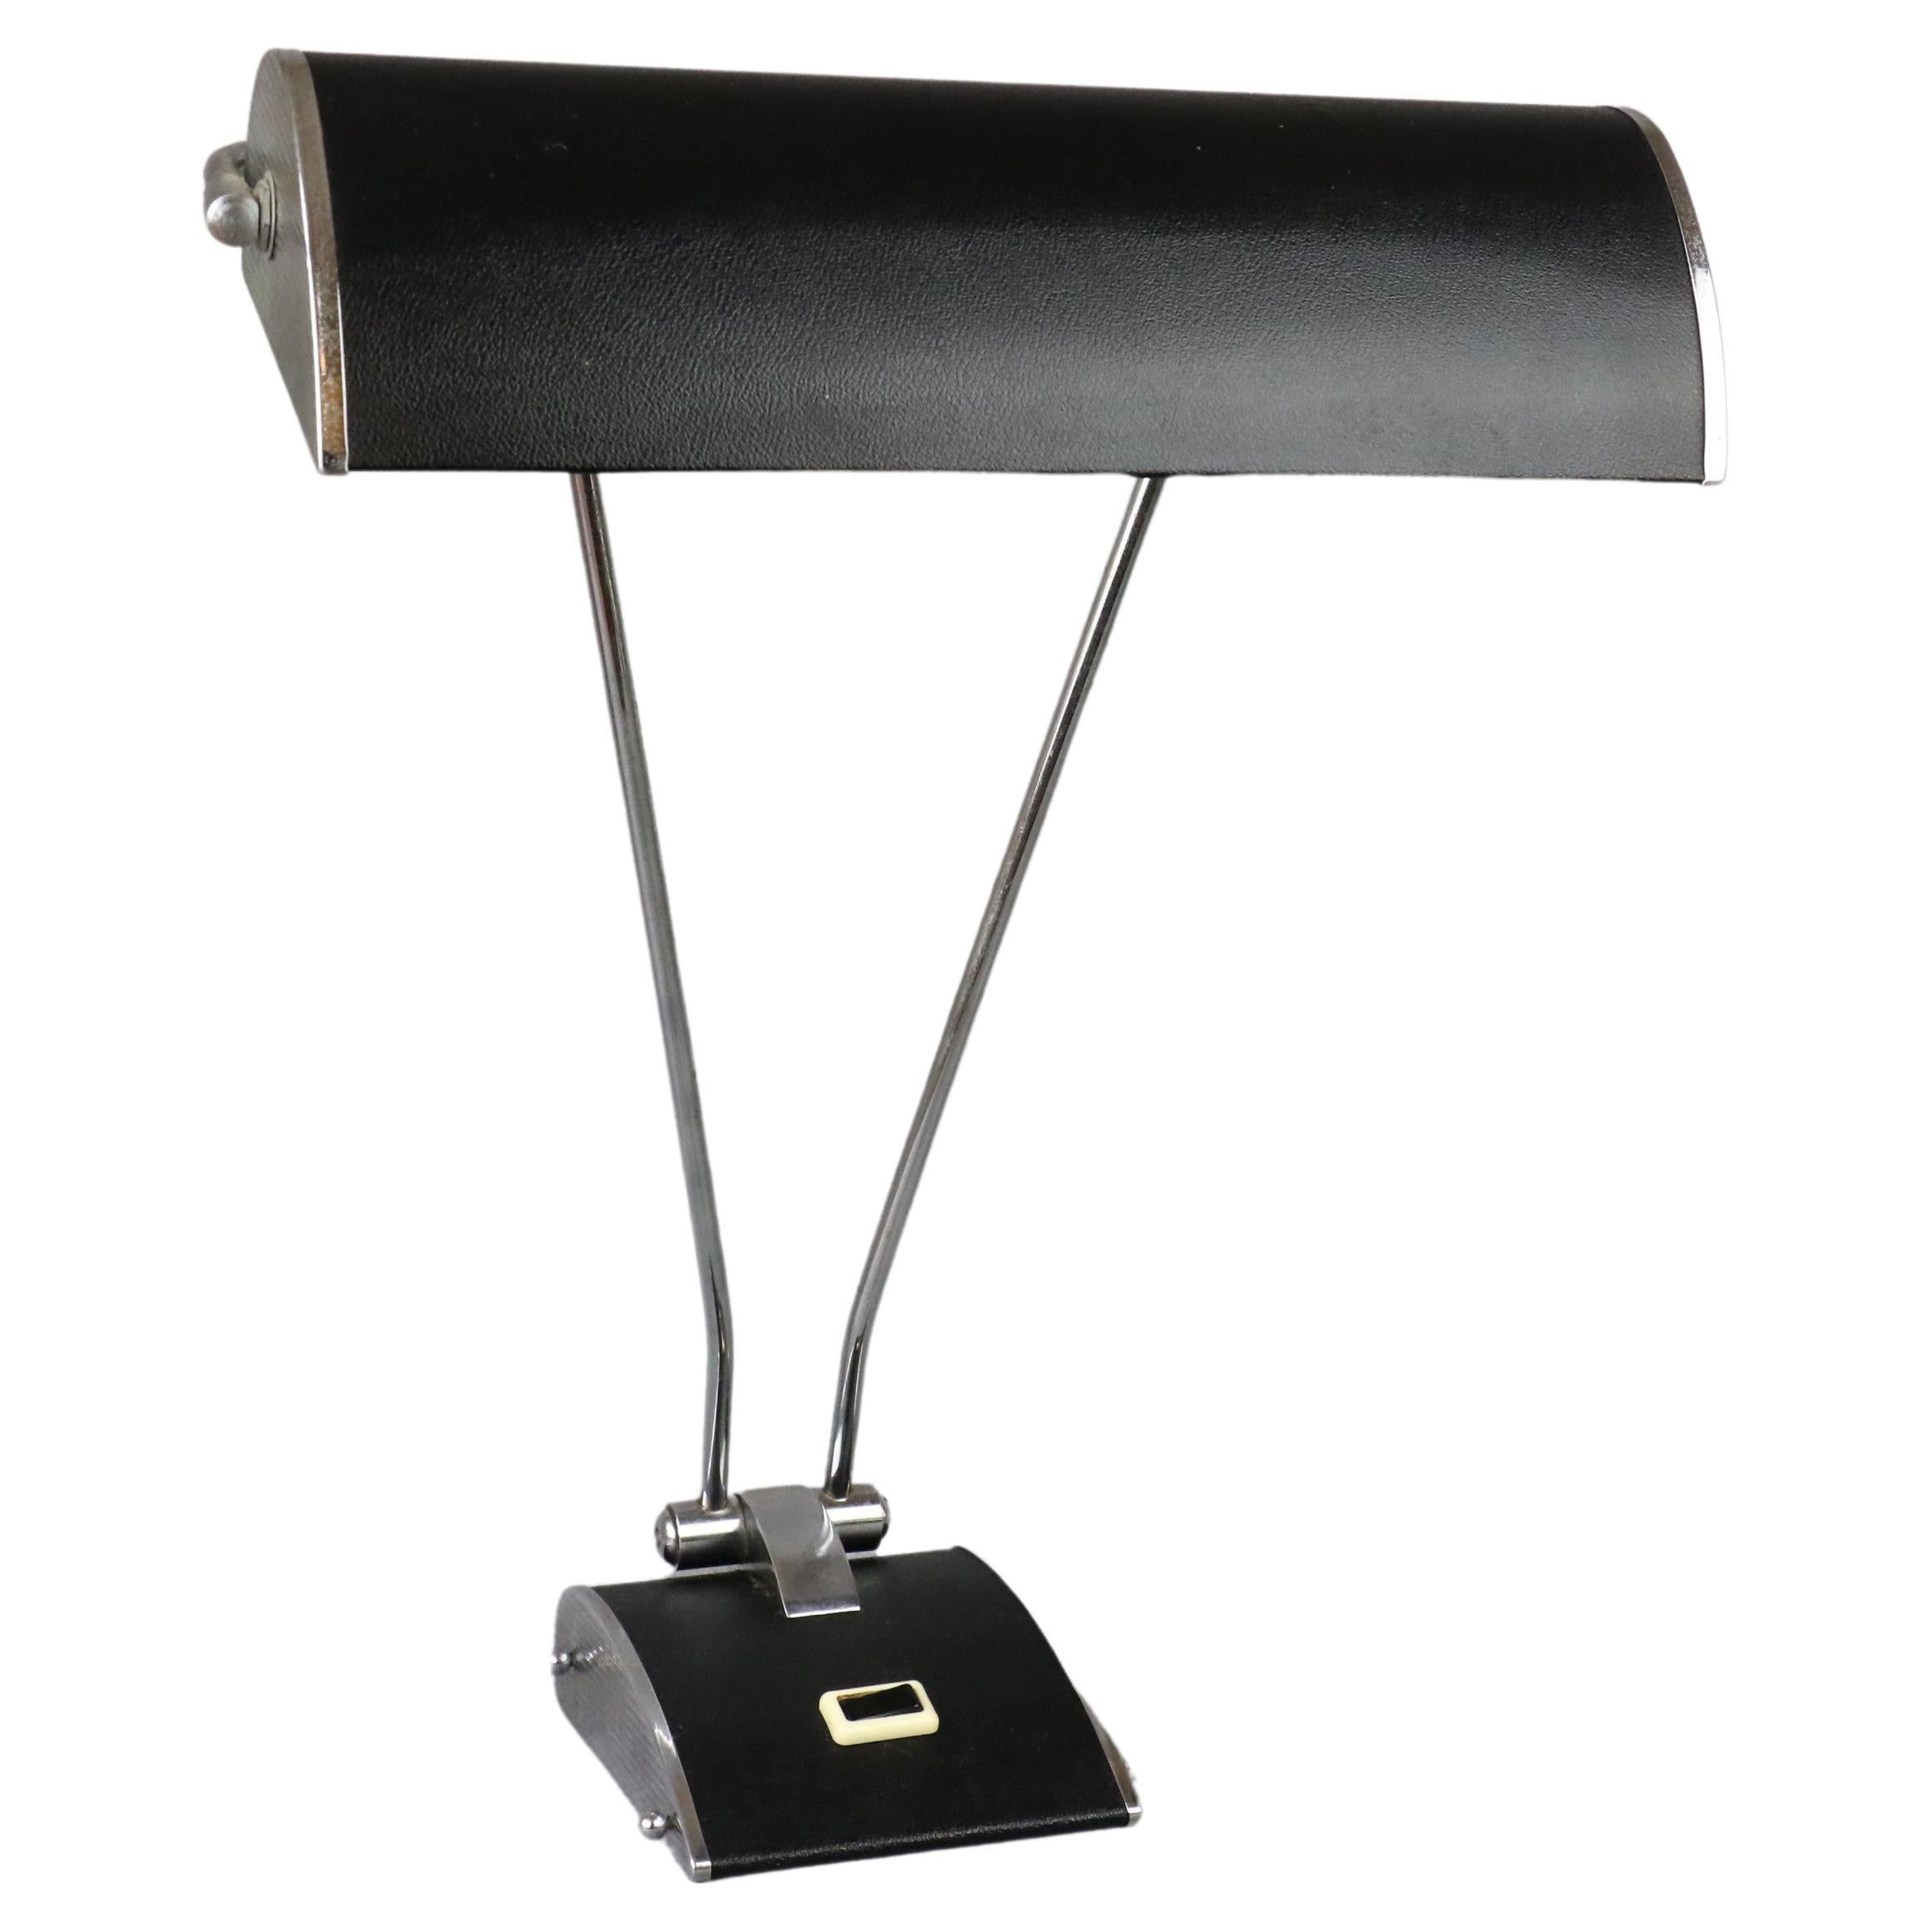 1950s Mid-century table lamp by Eileen Gray, JUMO, France. 